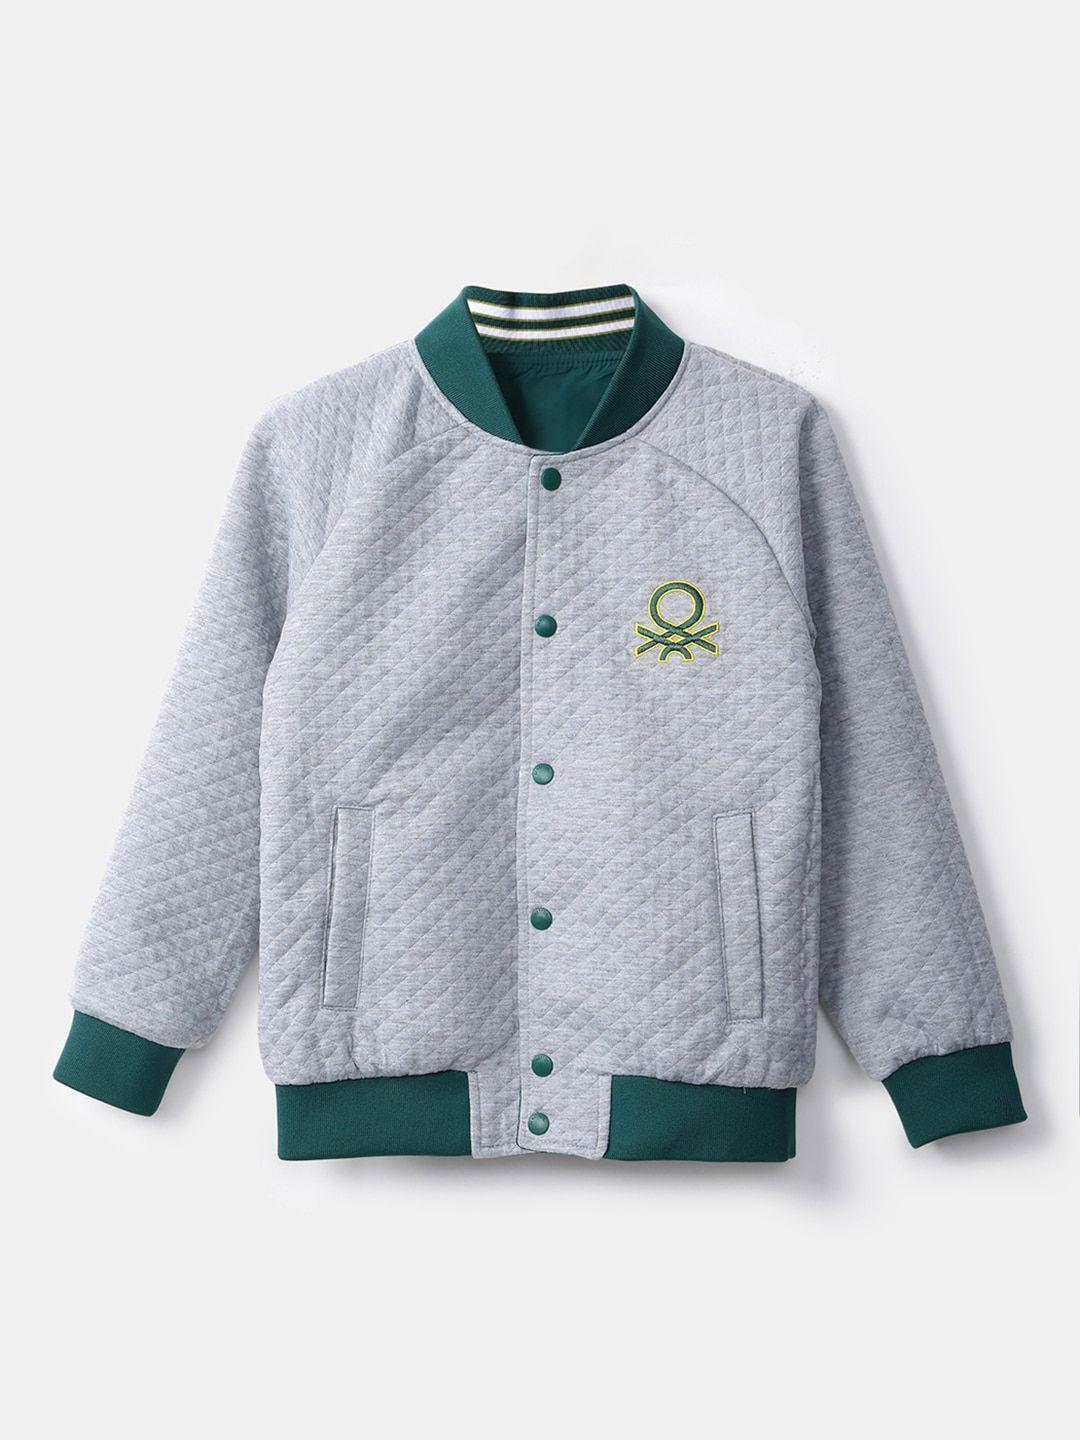 united-colors-of-benetton-boys-teal-grey-bomber-jacket